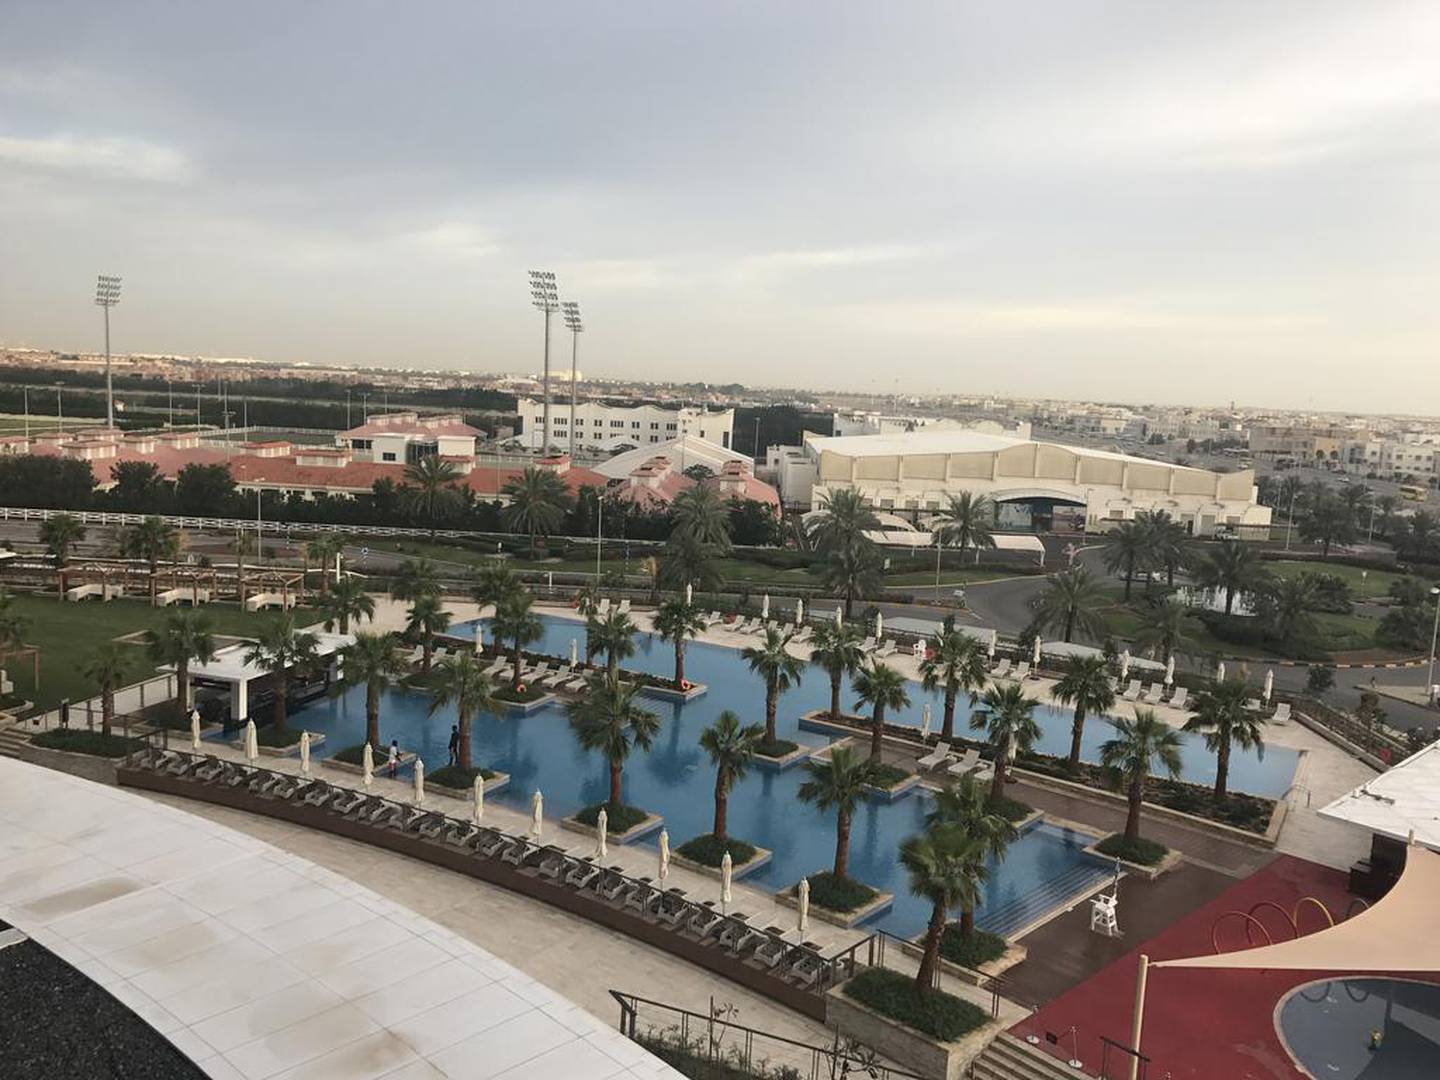 One of the biggest hotel pools in Abu Dhabi as seen from the balcony of an executive room at Marriott Al Forsan. Courtesy Melinda Healy